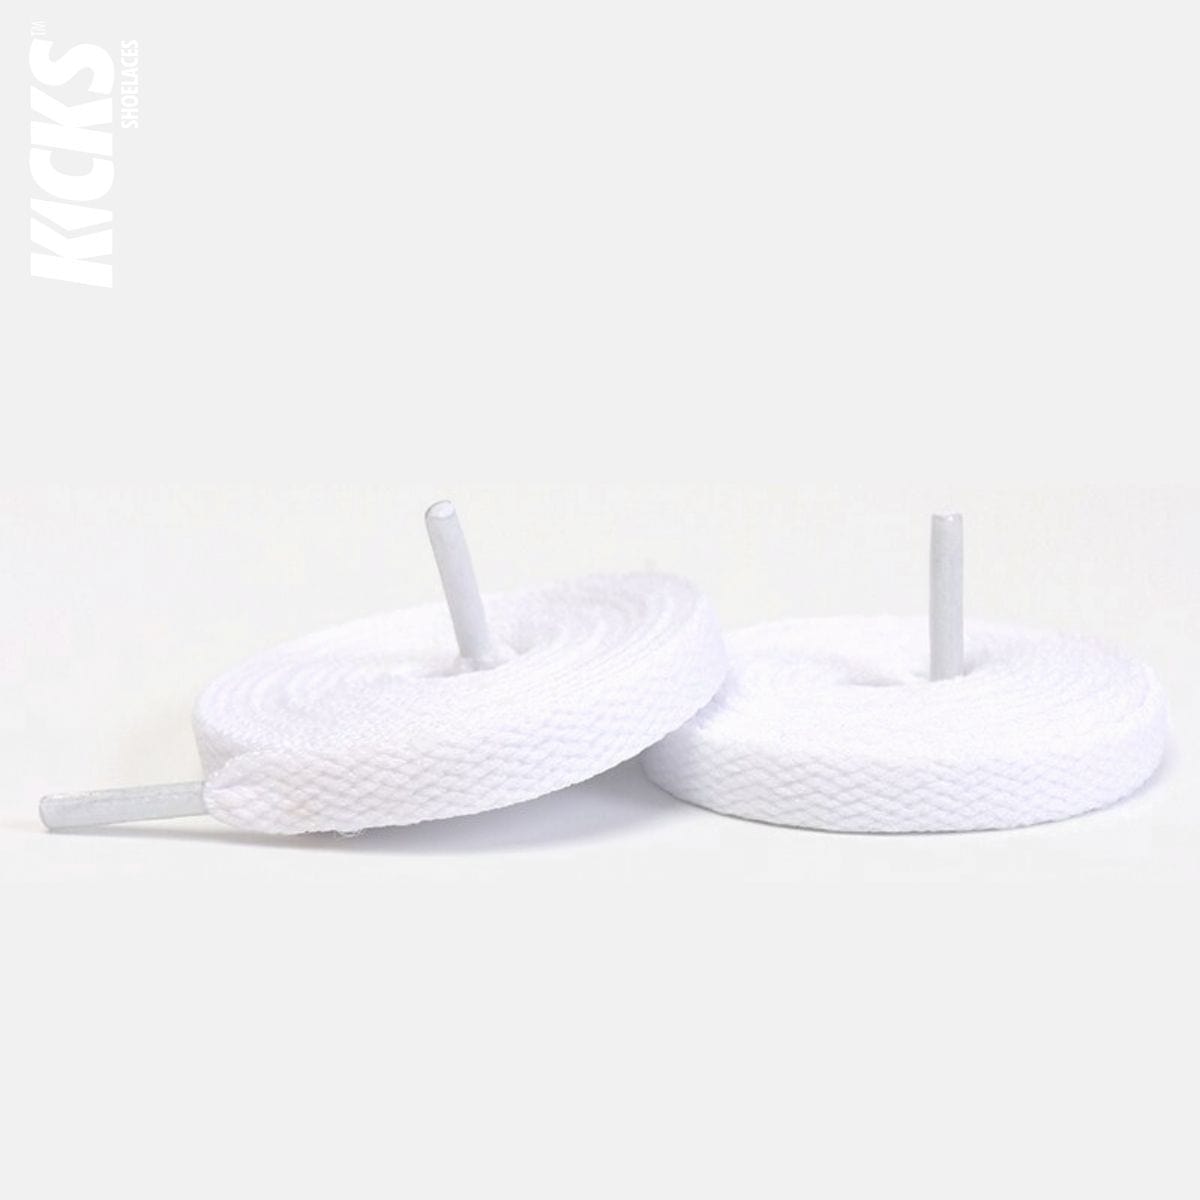 Nike Air Force 1 High Replacement Shoelaces - Kicks Shoelaces